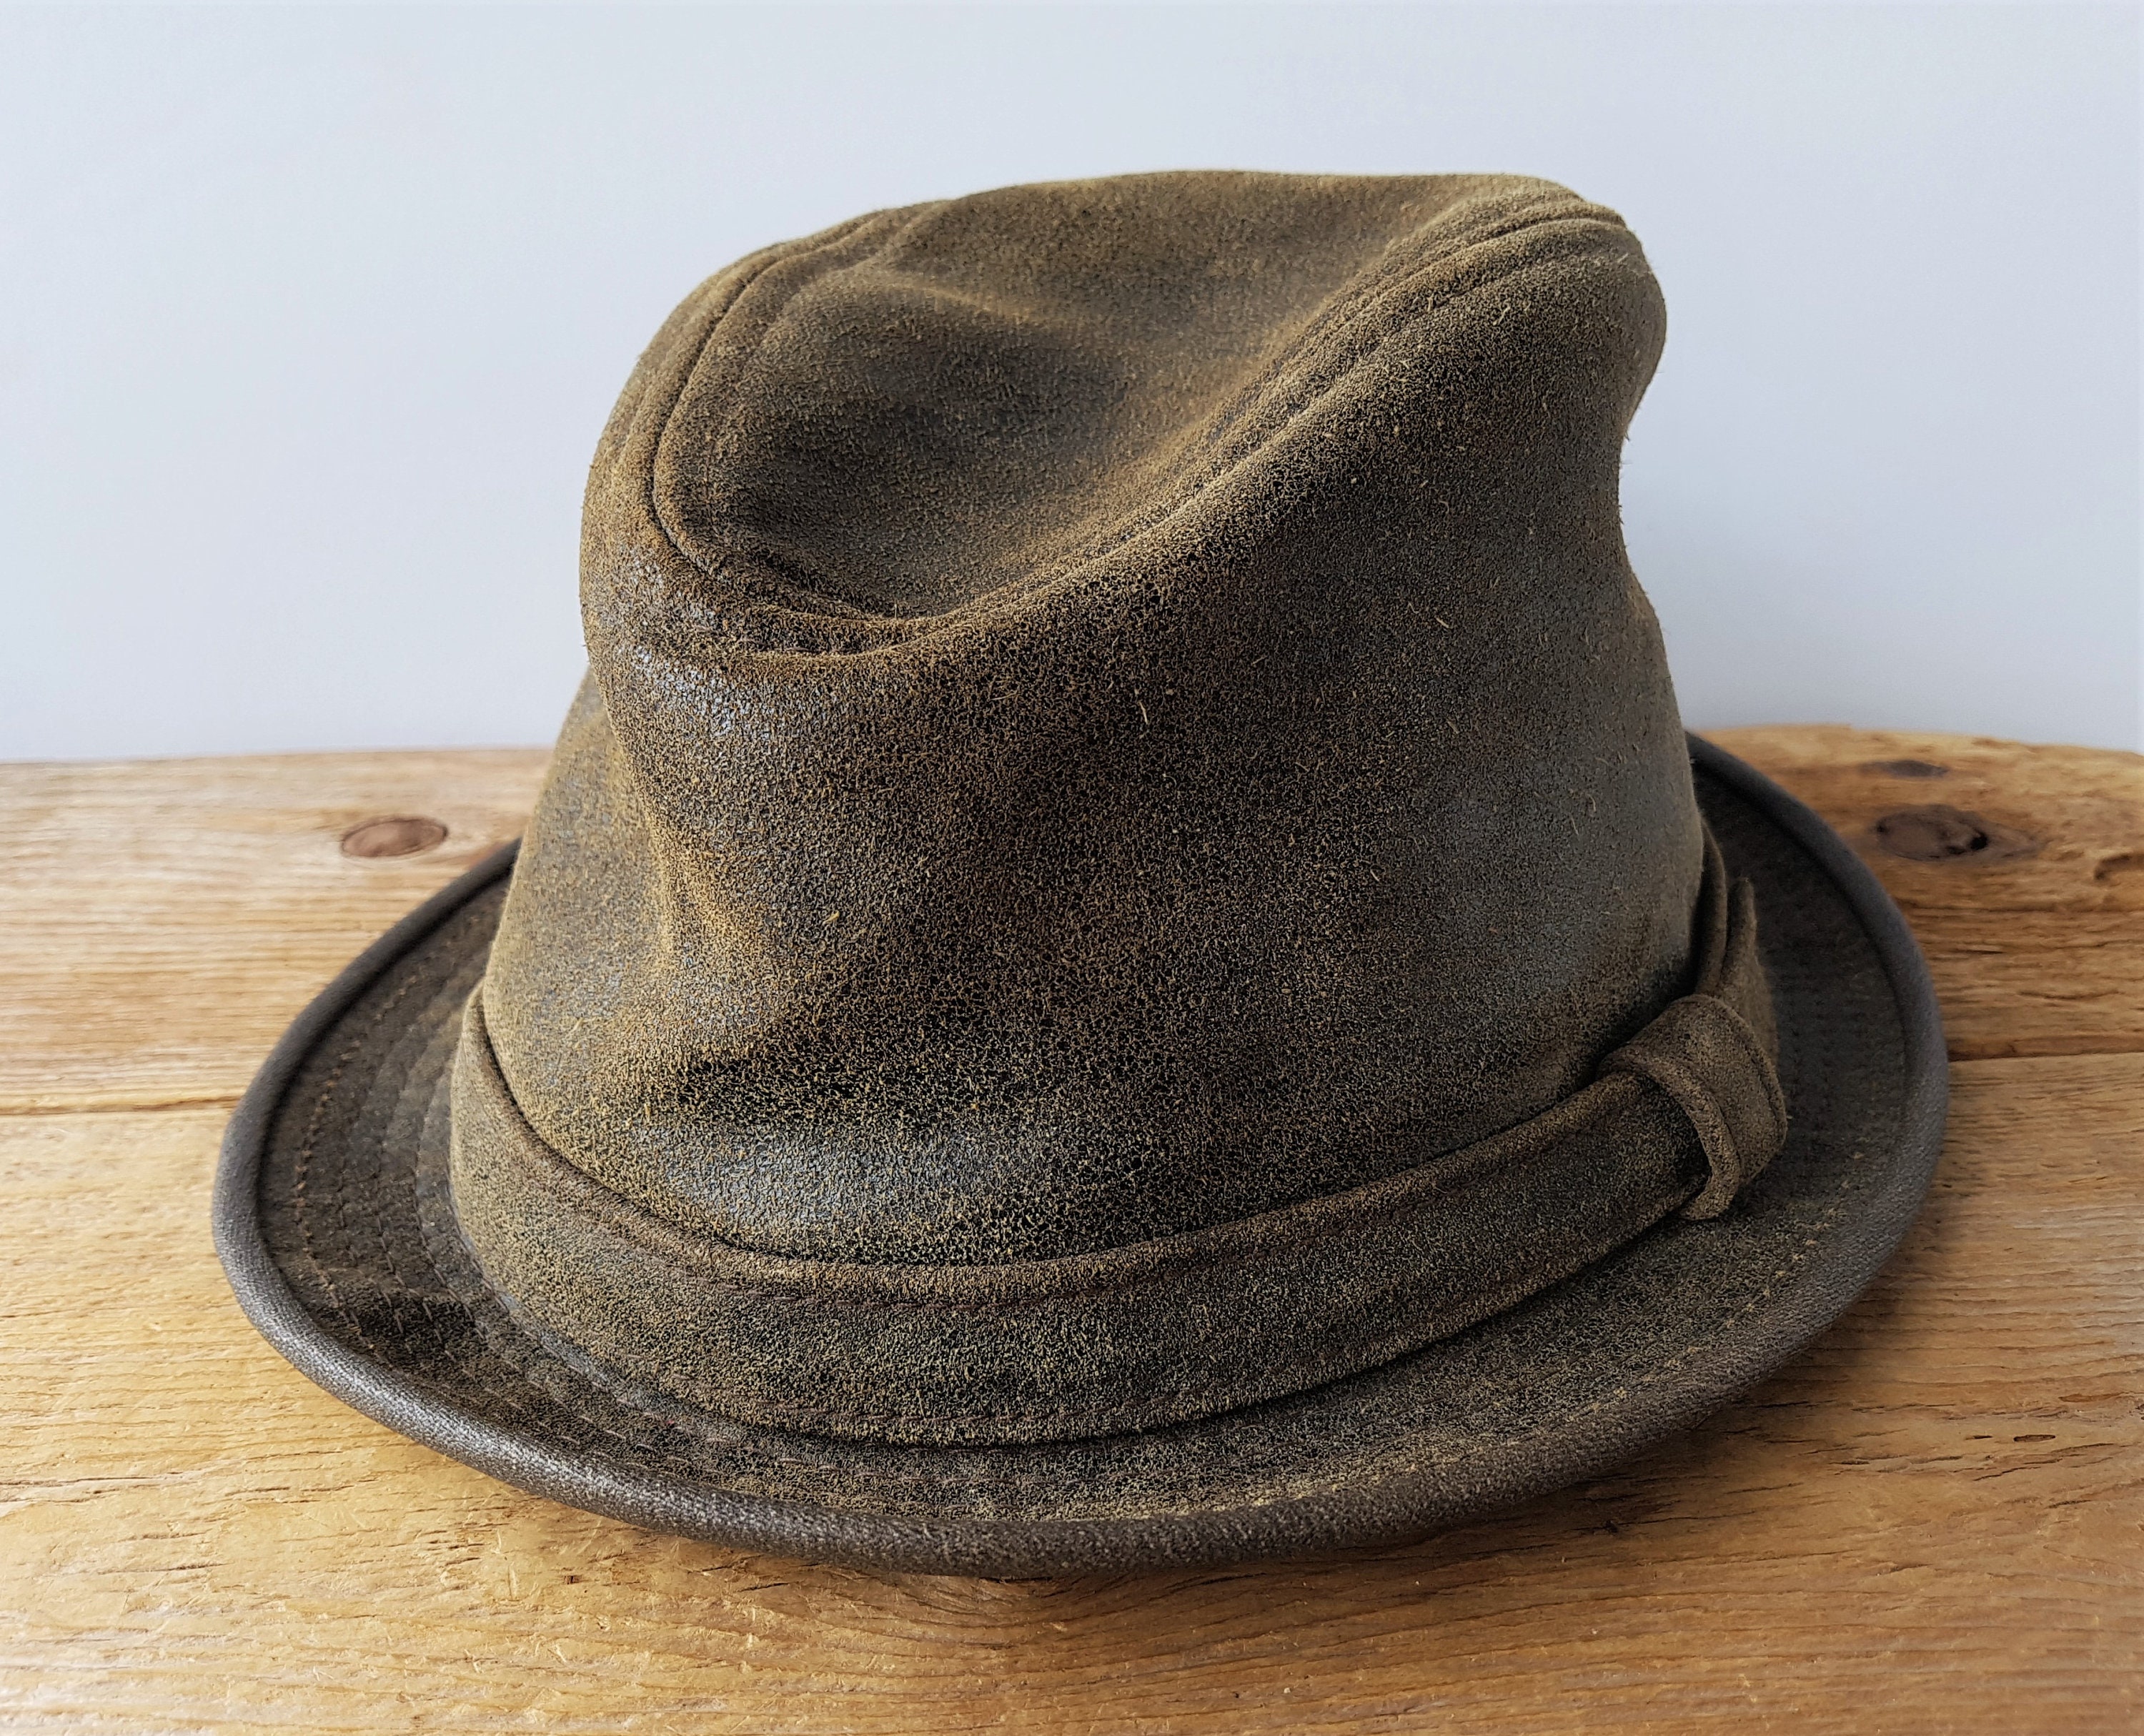 Karma Accessories Eureka Leather Fedora Hat in Olive or Distress Brown  S-XXL